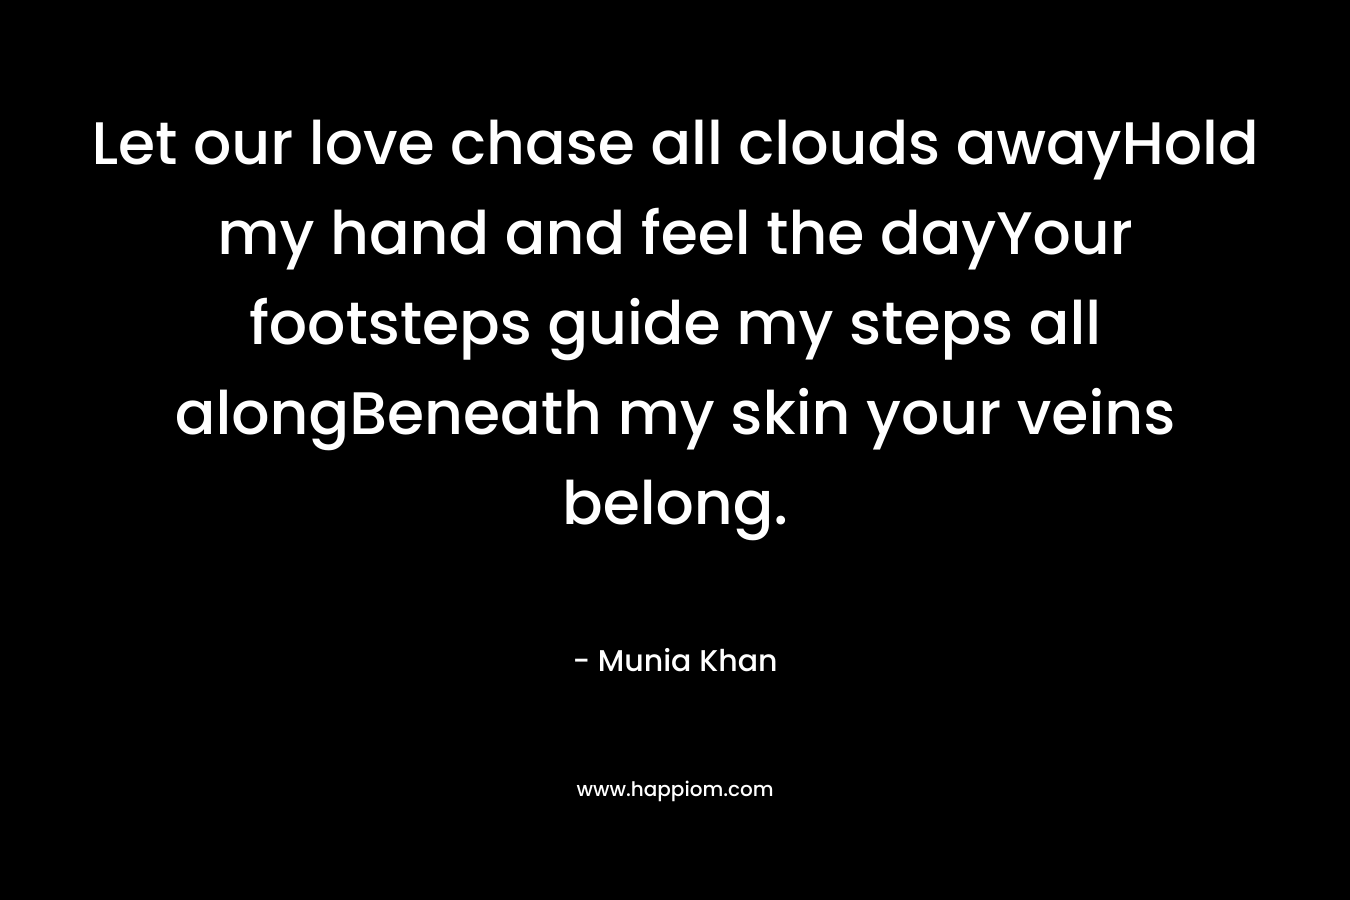 Let our love chase all clouds awayHold my hand and feel the dayYour footsteps guide my steps all alongBeneath my skin your veins belong.